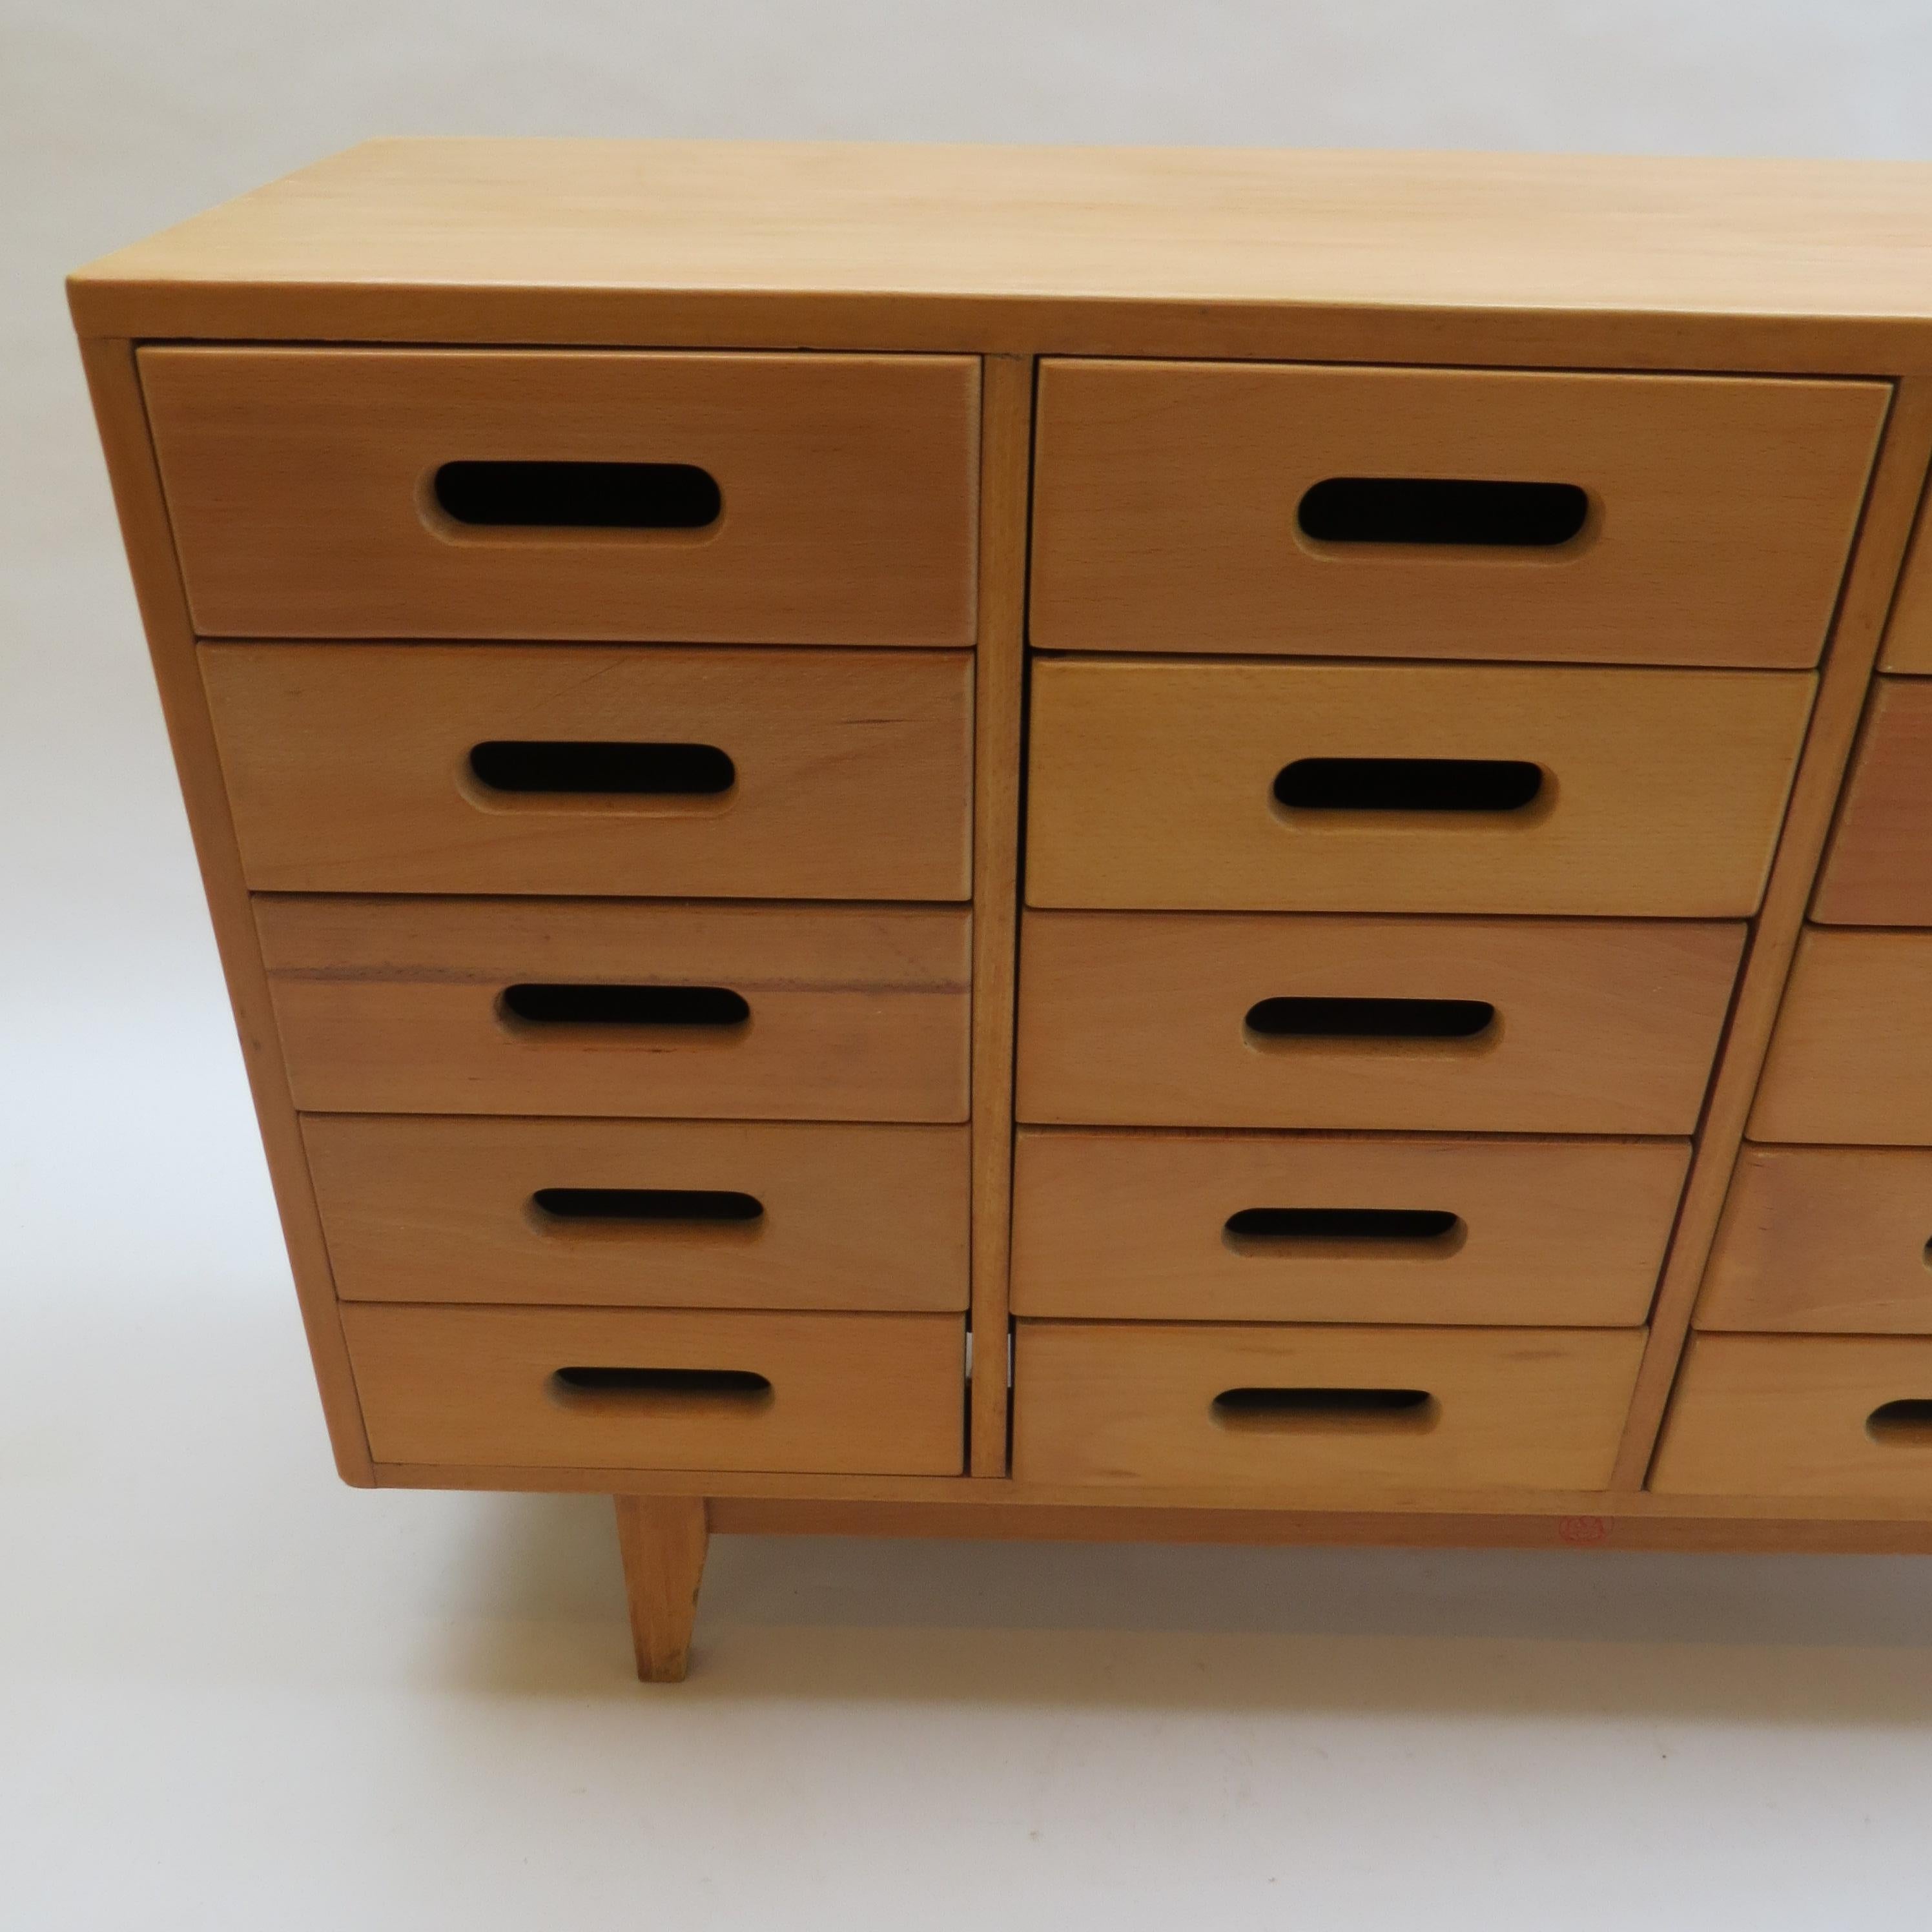 Chest of drawers dating from the 1950s, designed by James Leonard and manufactured by Esavian, UK.

Solid beech case with solid beech drawer fronts and beech drawer linings.  In very good overall condition, the case has been professionally